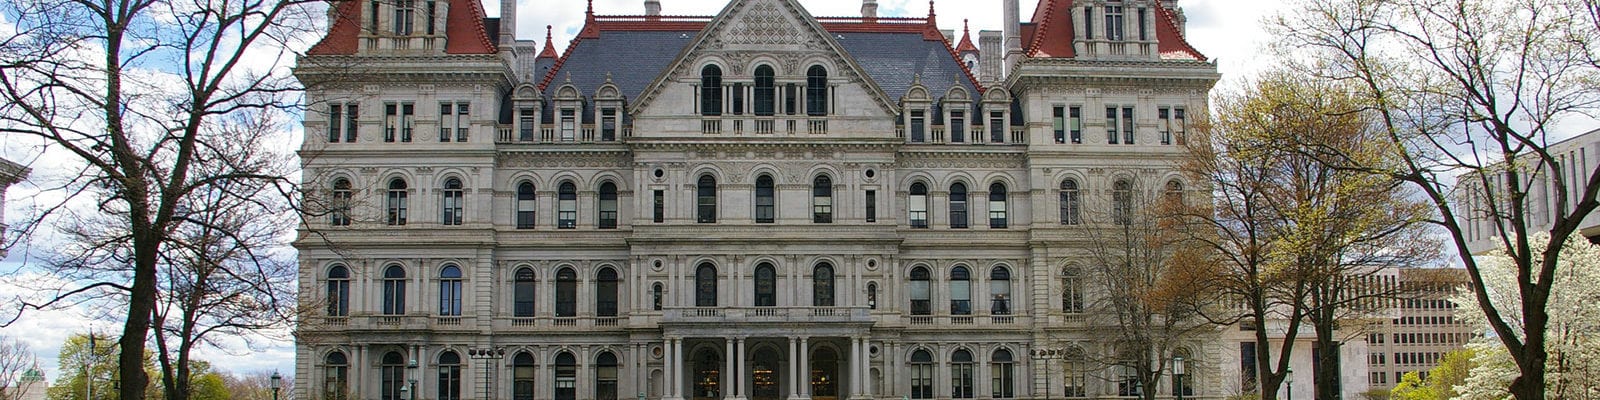 The New York State Capitol Building in Albany, New York.